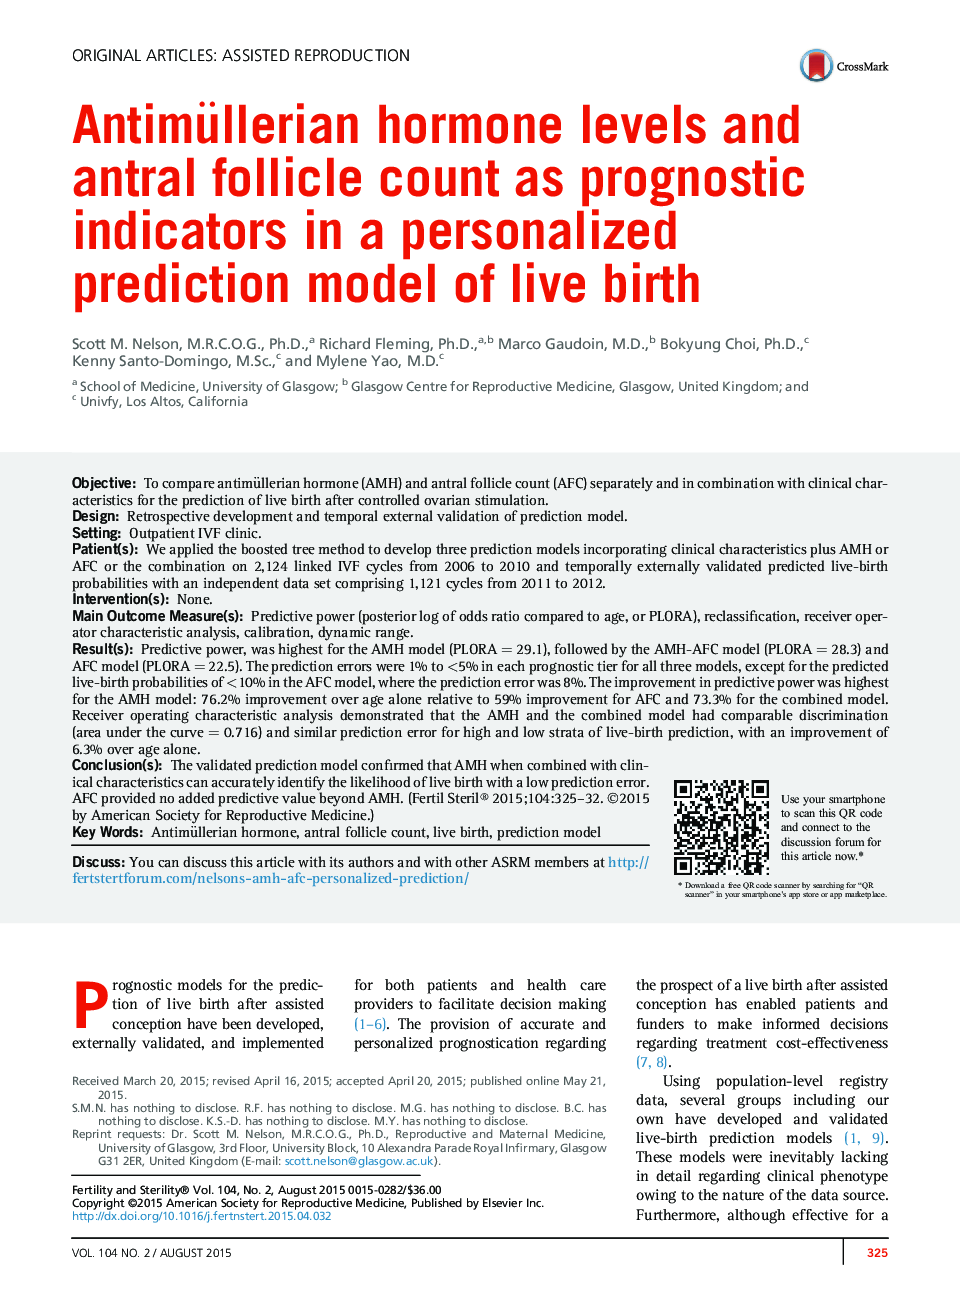 Antimüllerian hormone levels and antral follicle count as prognostic indicators in a personalized prediction model of live birth 